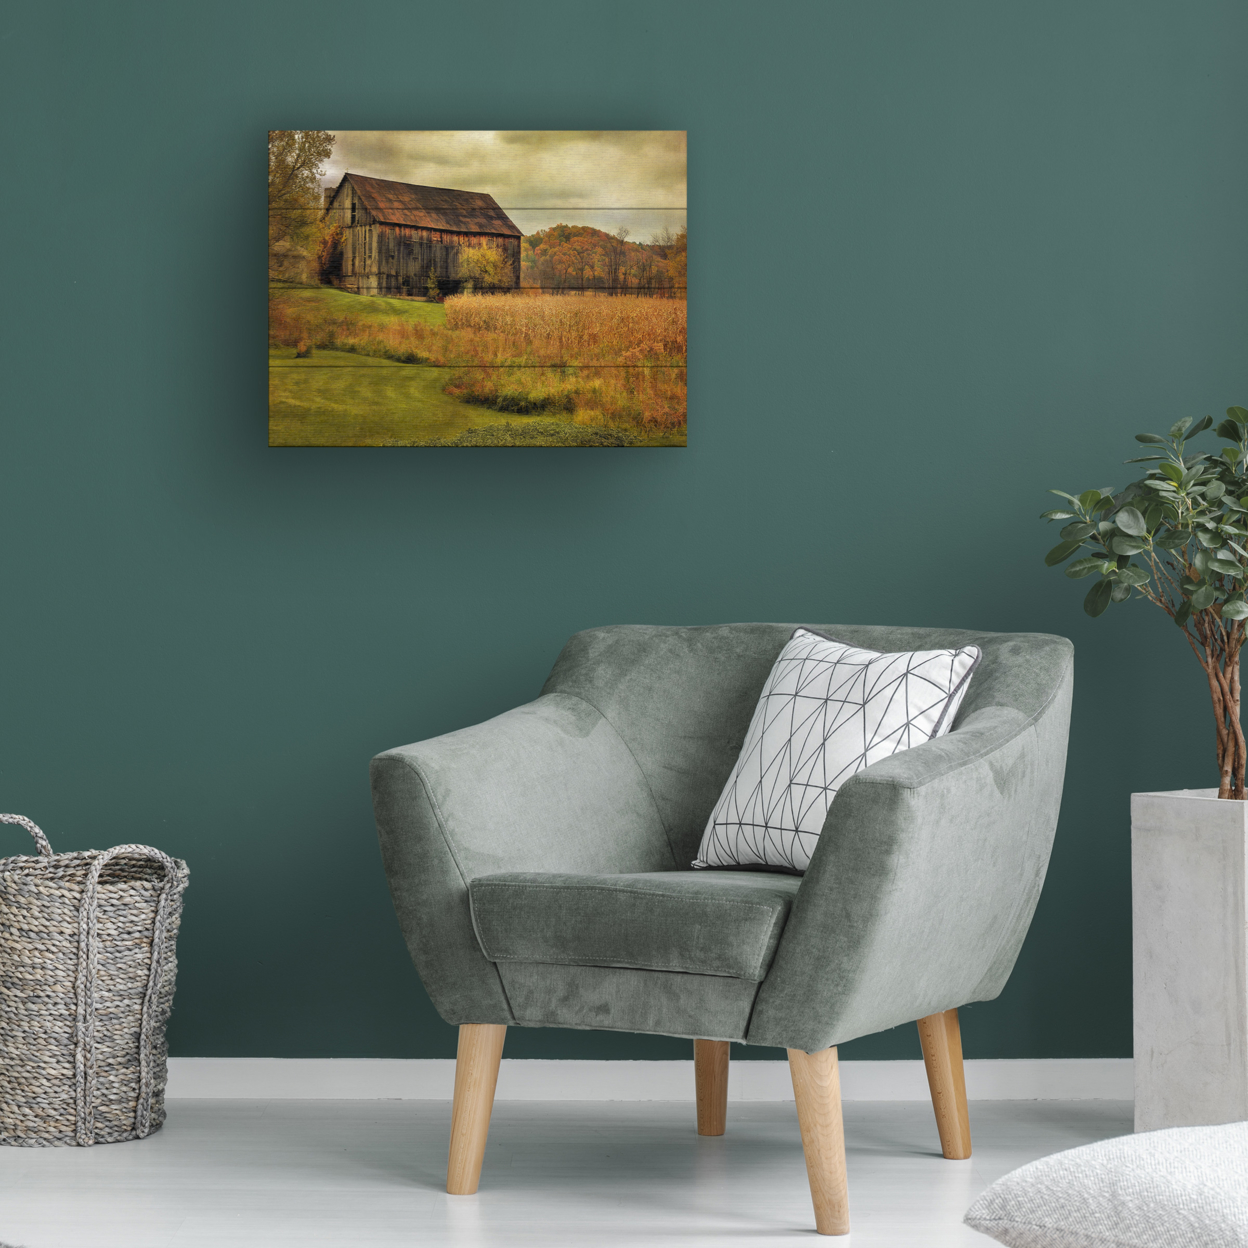 Wall Art 12 X 16 Inches Titled Old Barn On Rainy Day Ready To Hang Printed On Wooden Planks